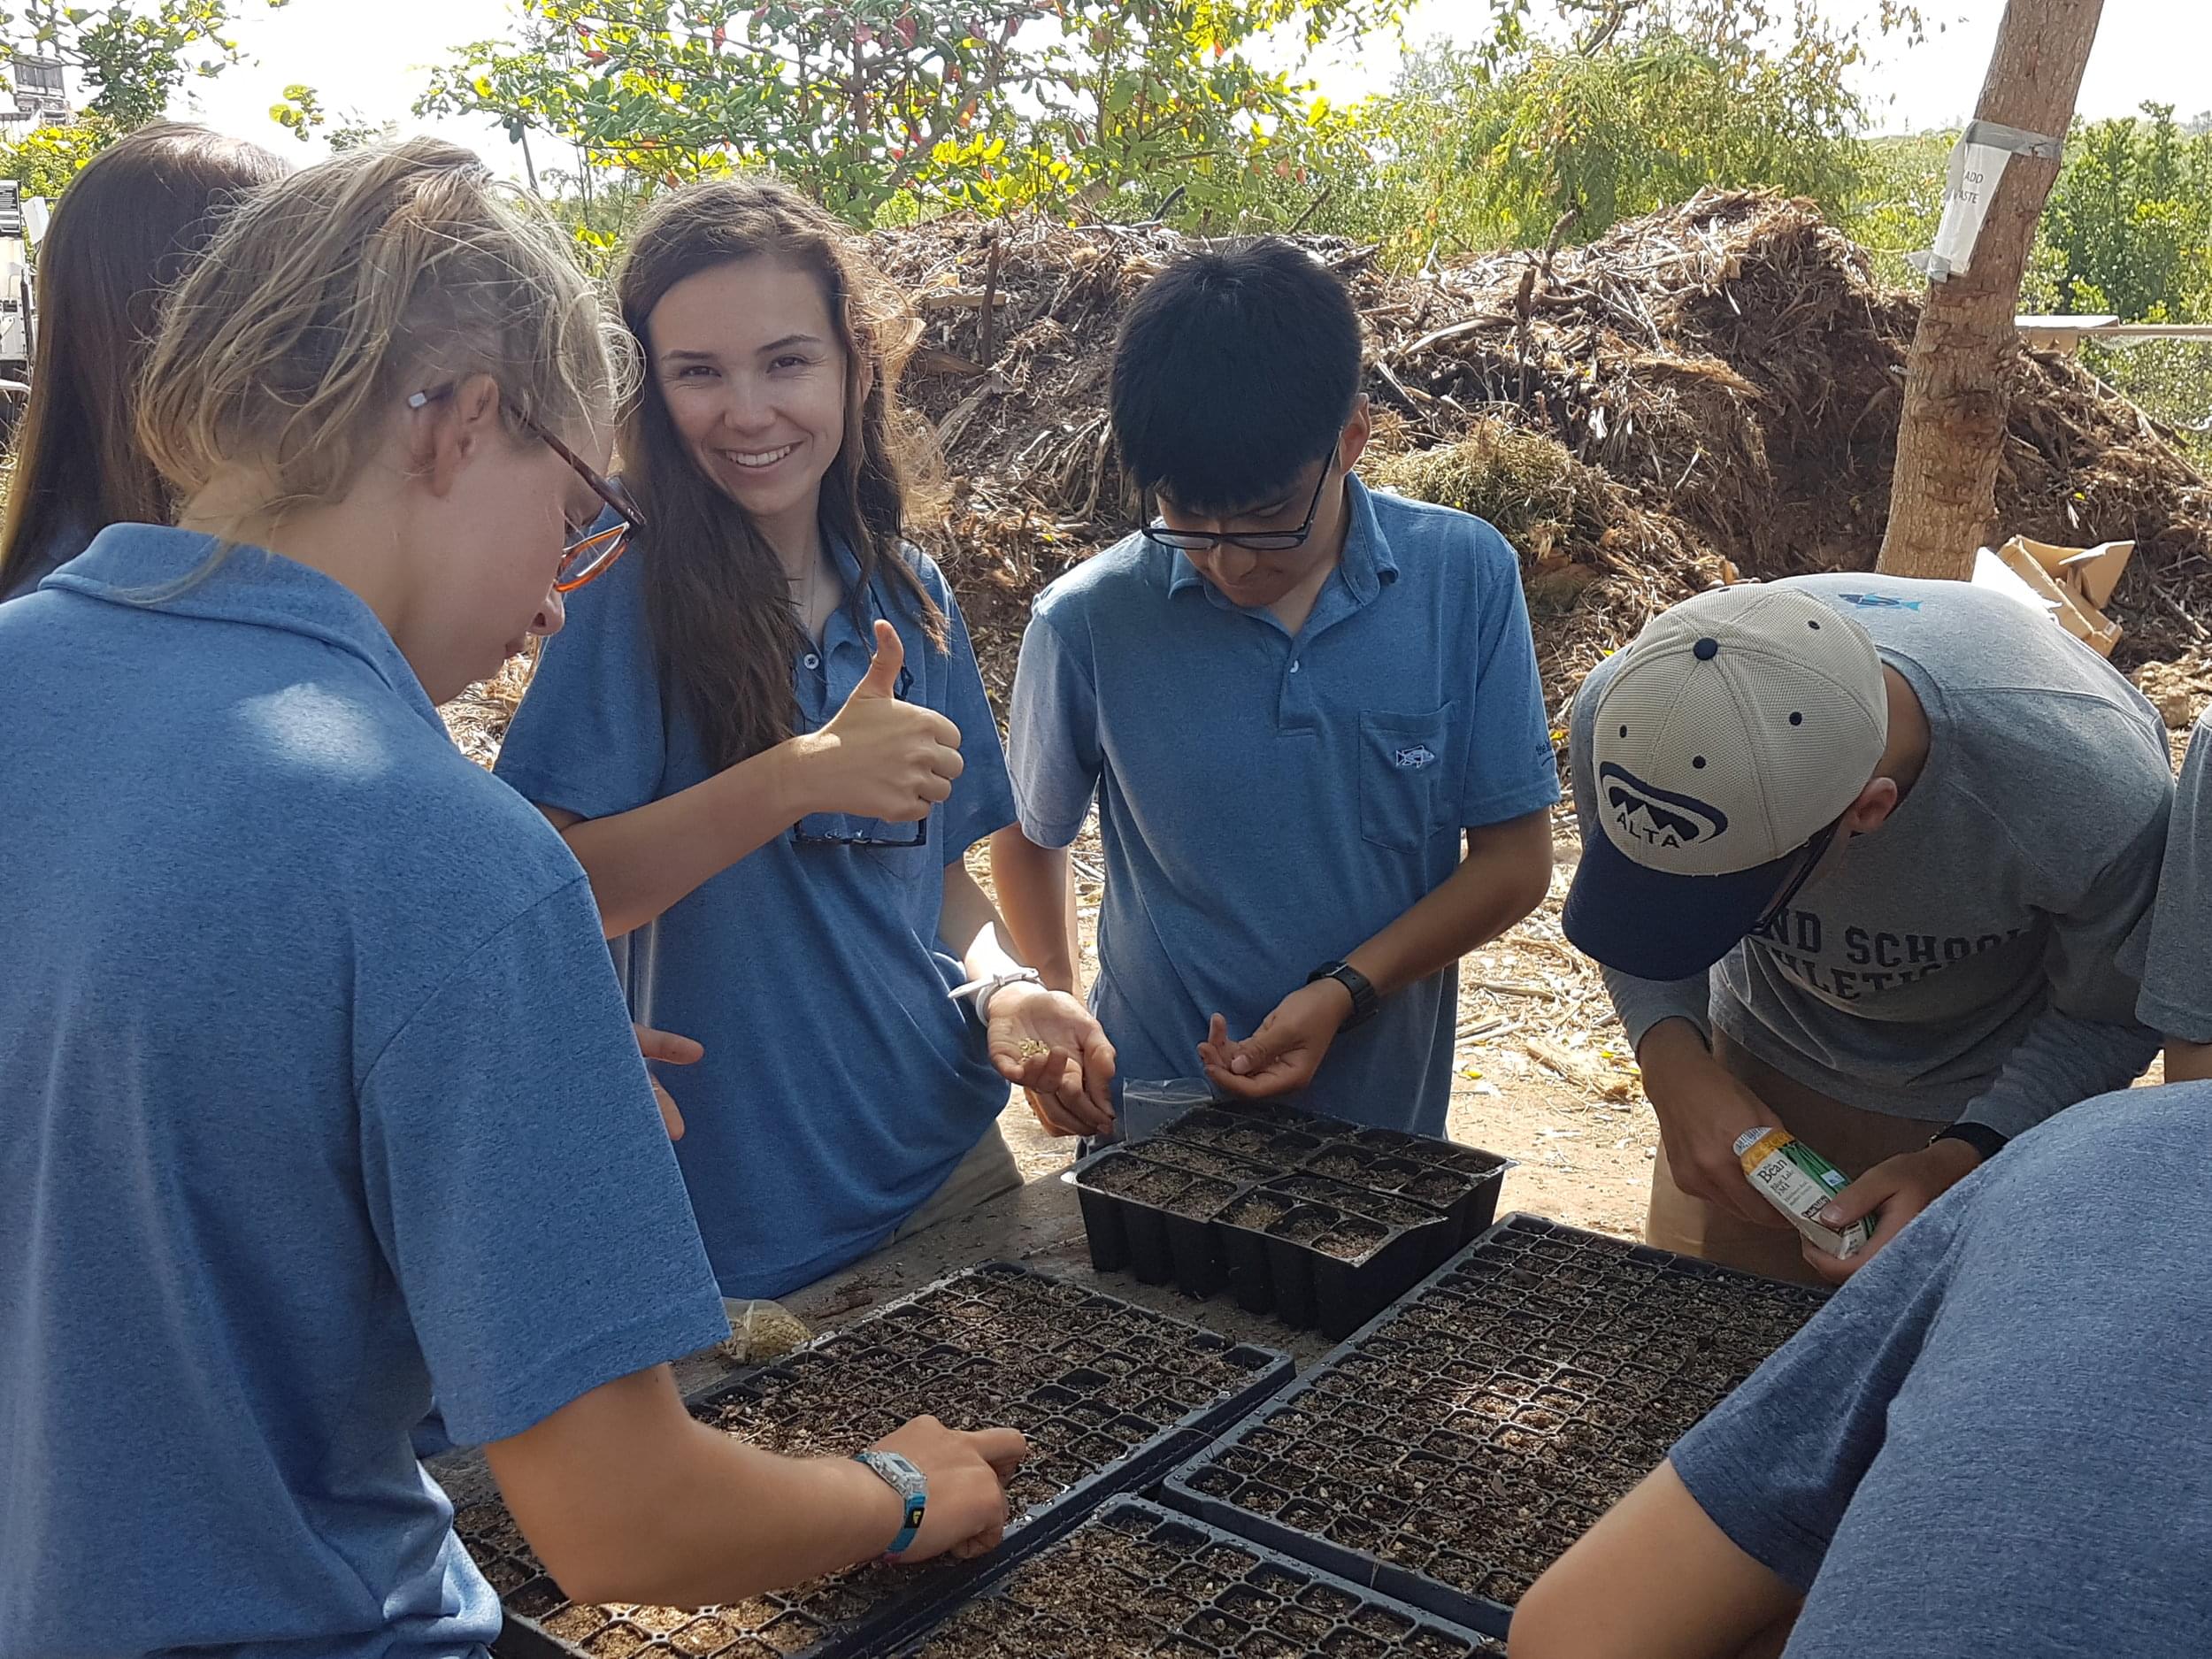 The Research team plants seeds to then be transplanted into the new grow beds in the farm.